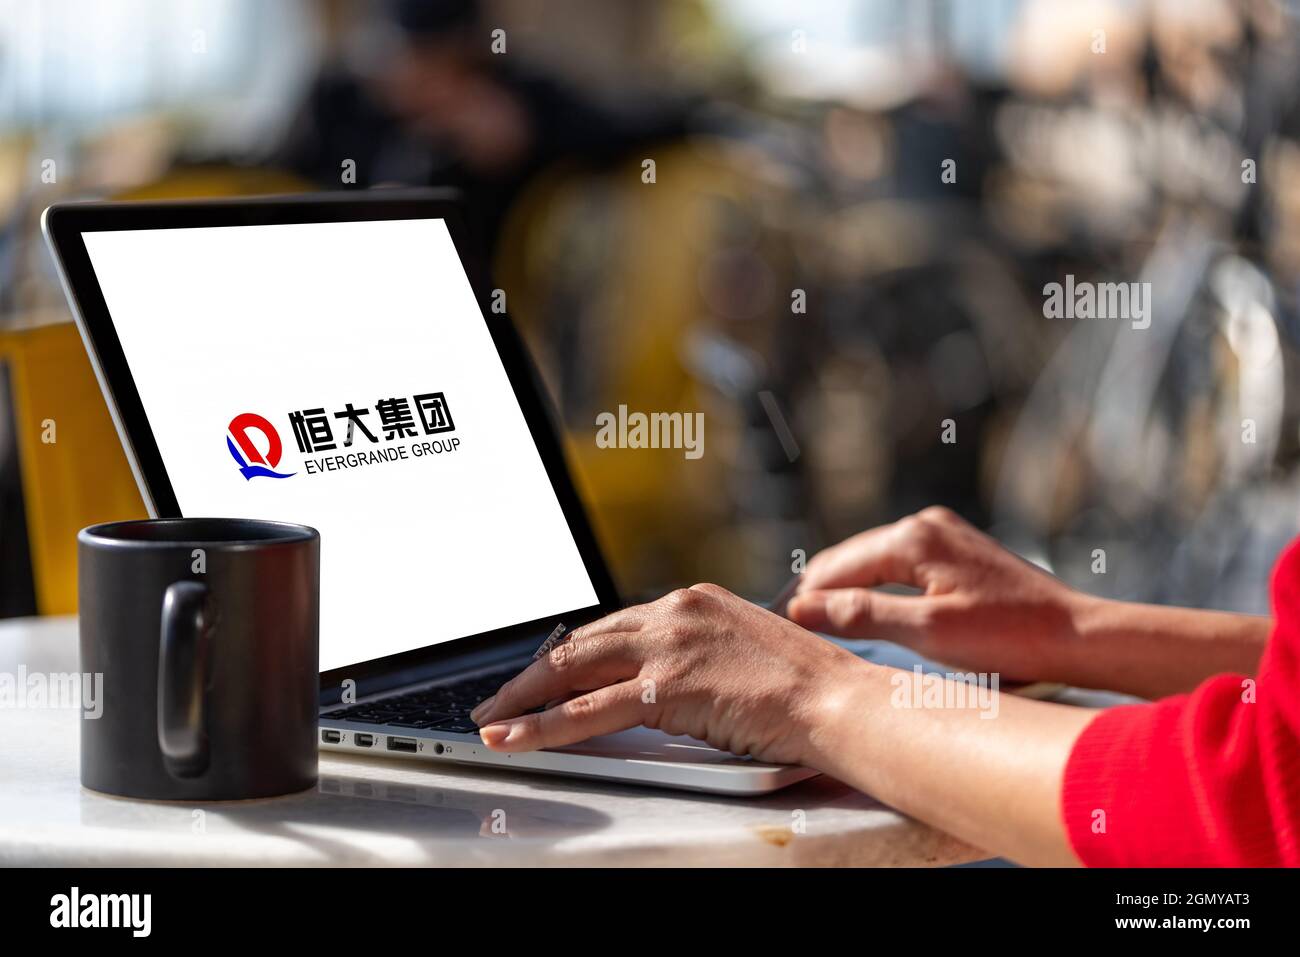 Antalya, Turkey - September 21, 2021: Chinese real estate company Evergrande Real Estate Group logo on the screen of the woman's computer. Stock Photo